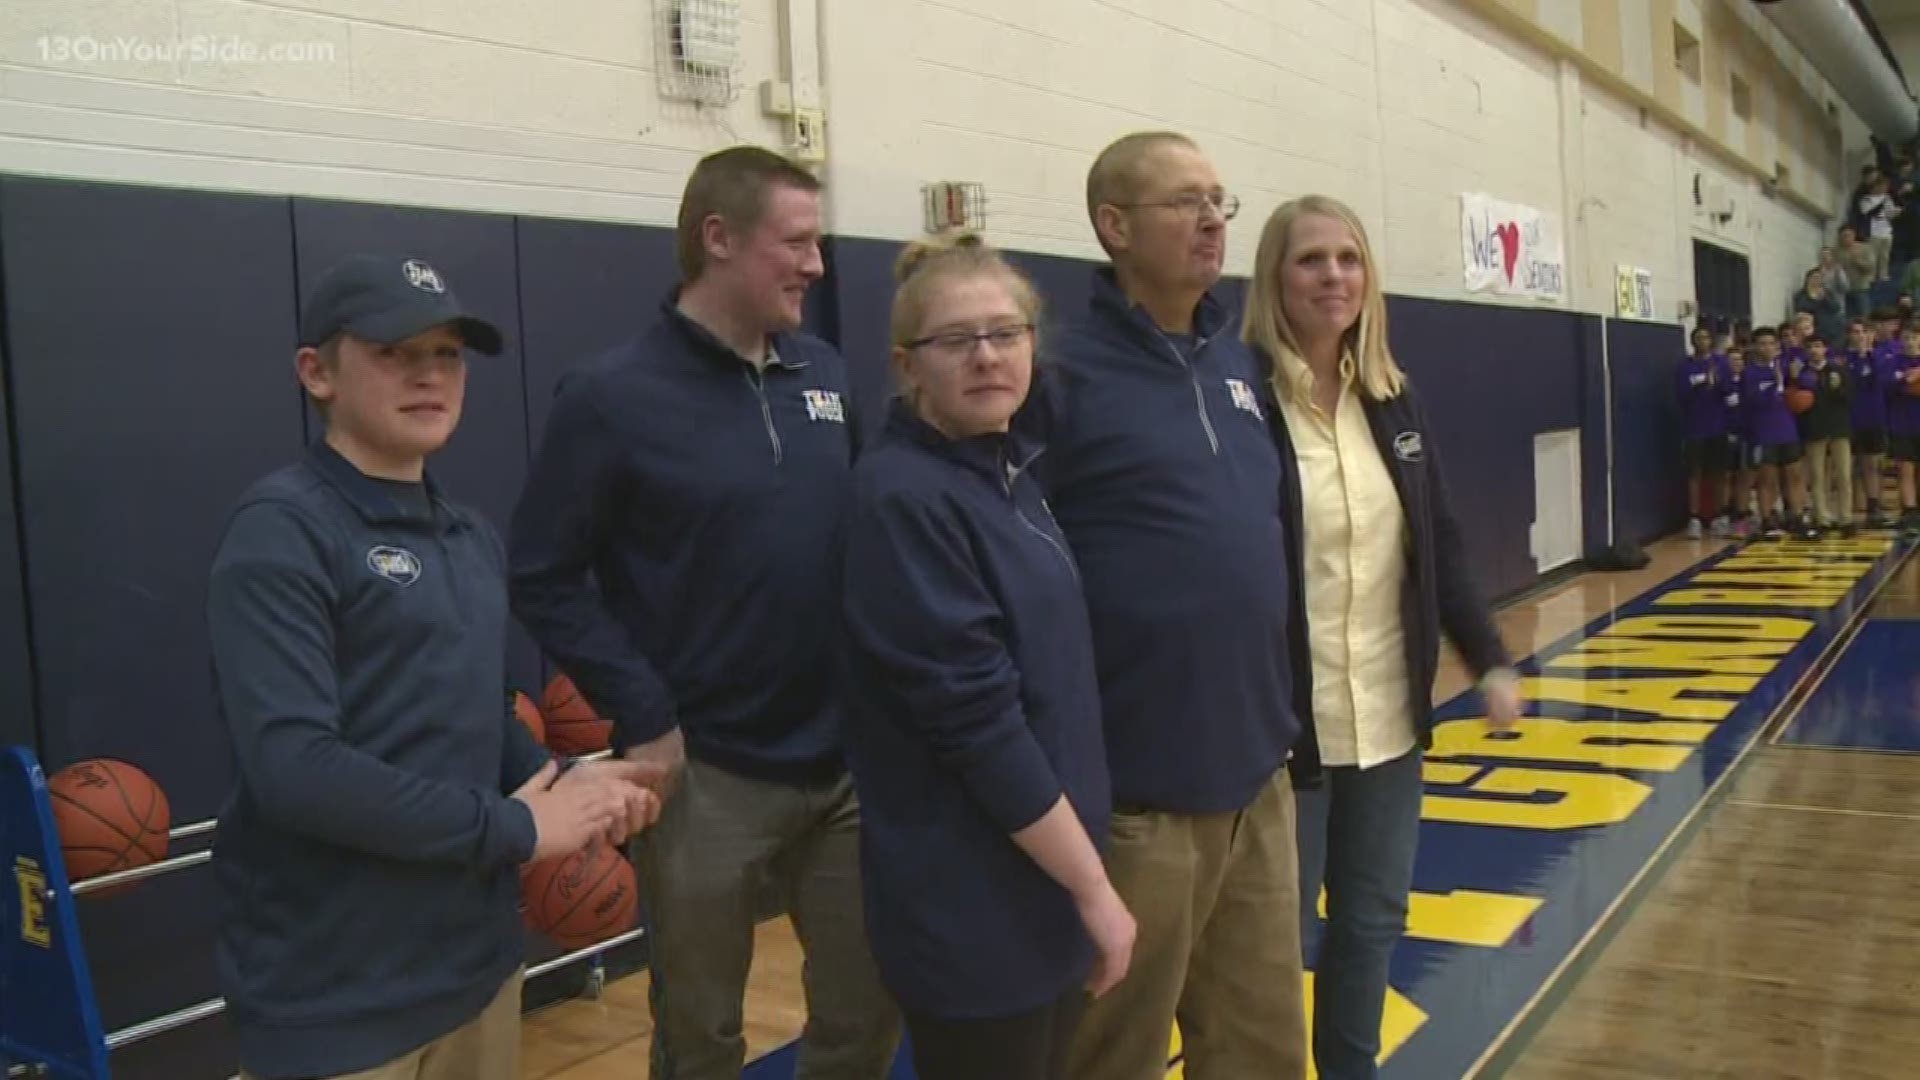 Forest Hills Northern and East Grand Rapids put their rivalry aside for a good cause. The two schools came together to raise money for man suffering from cancer.